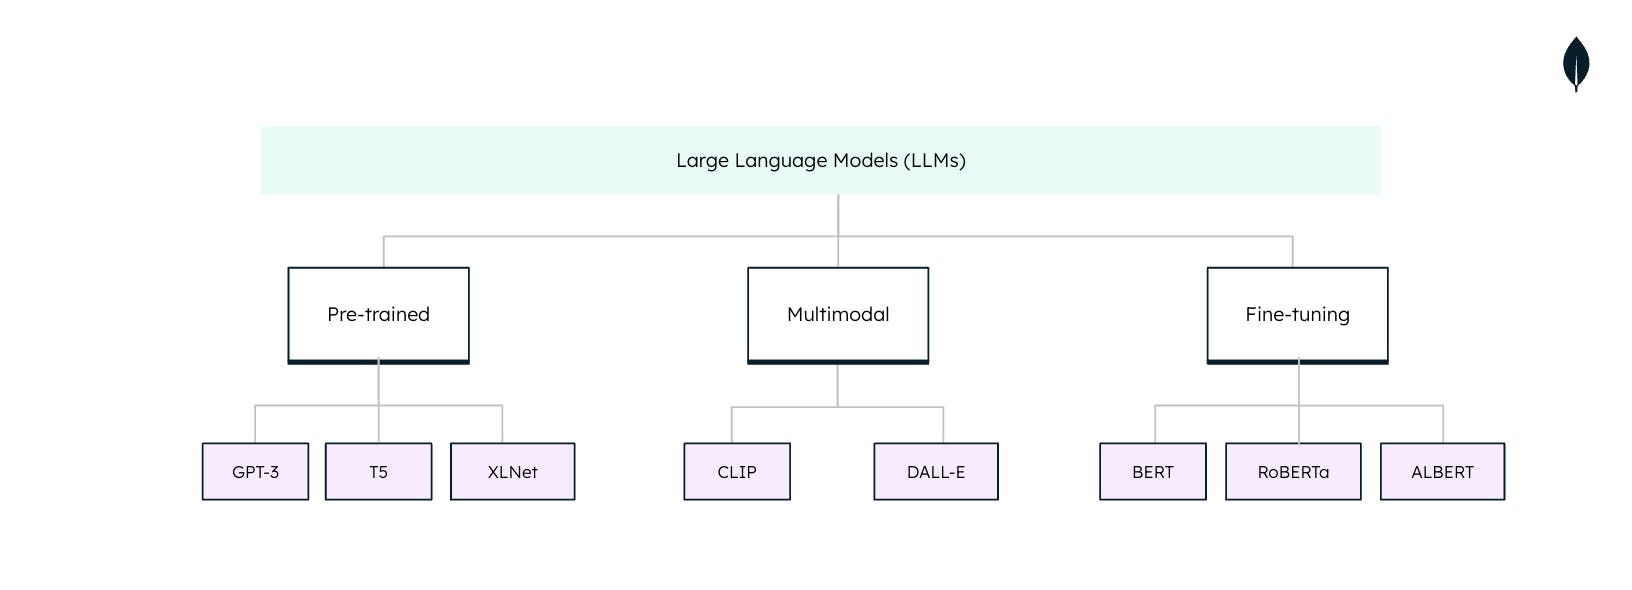 A flowchart depicting the classification of large language models.